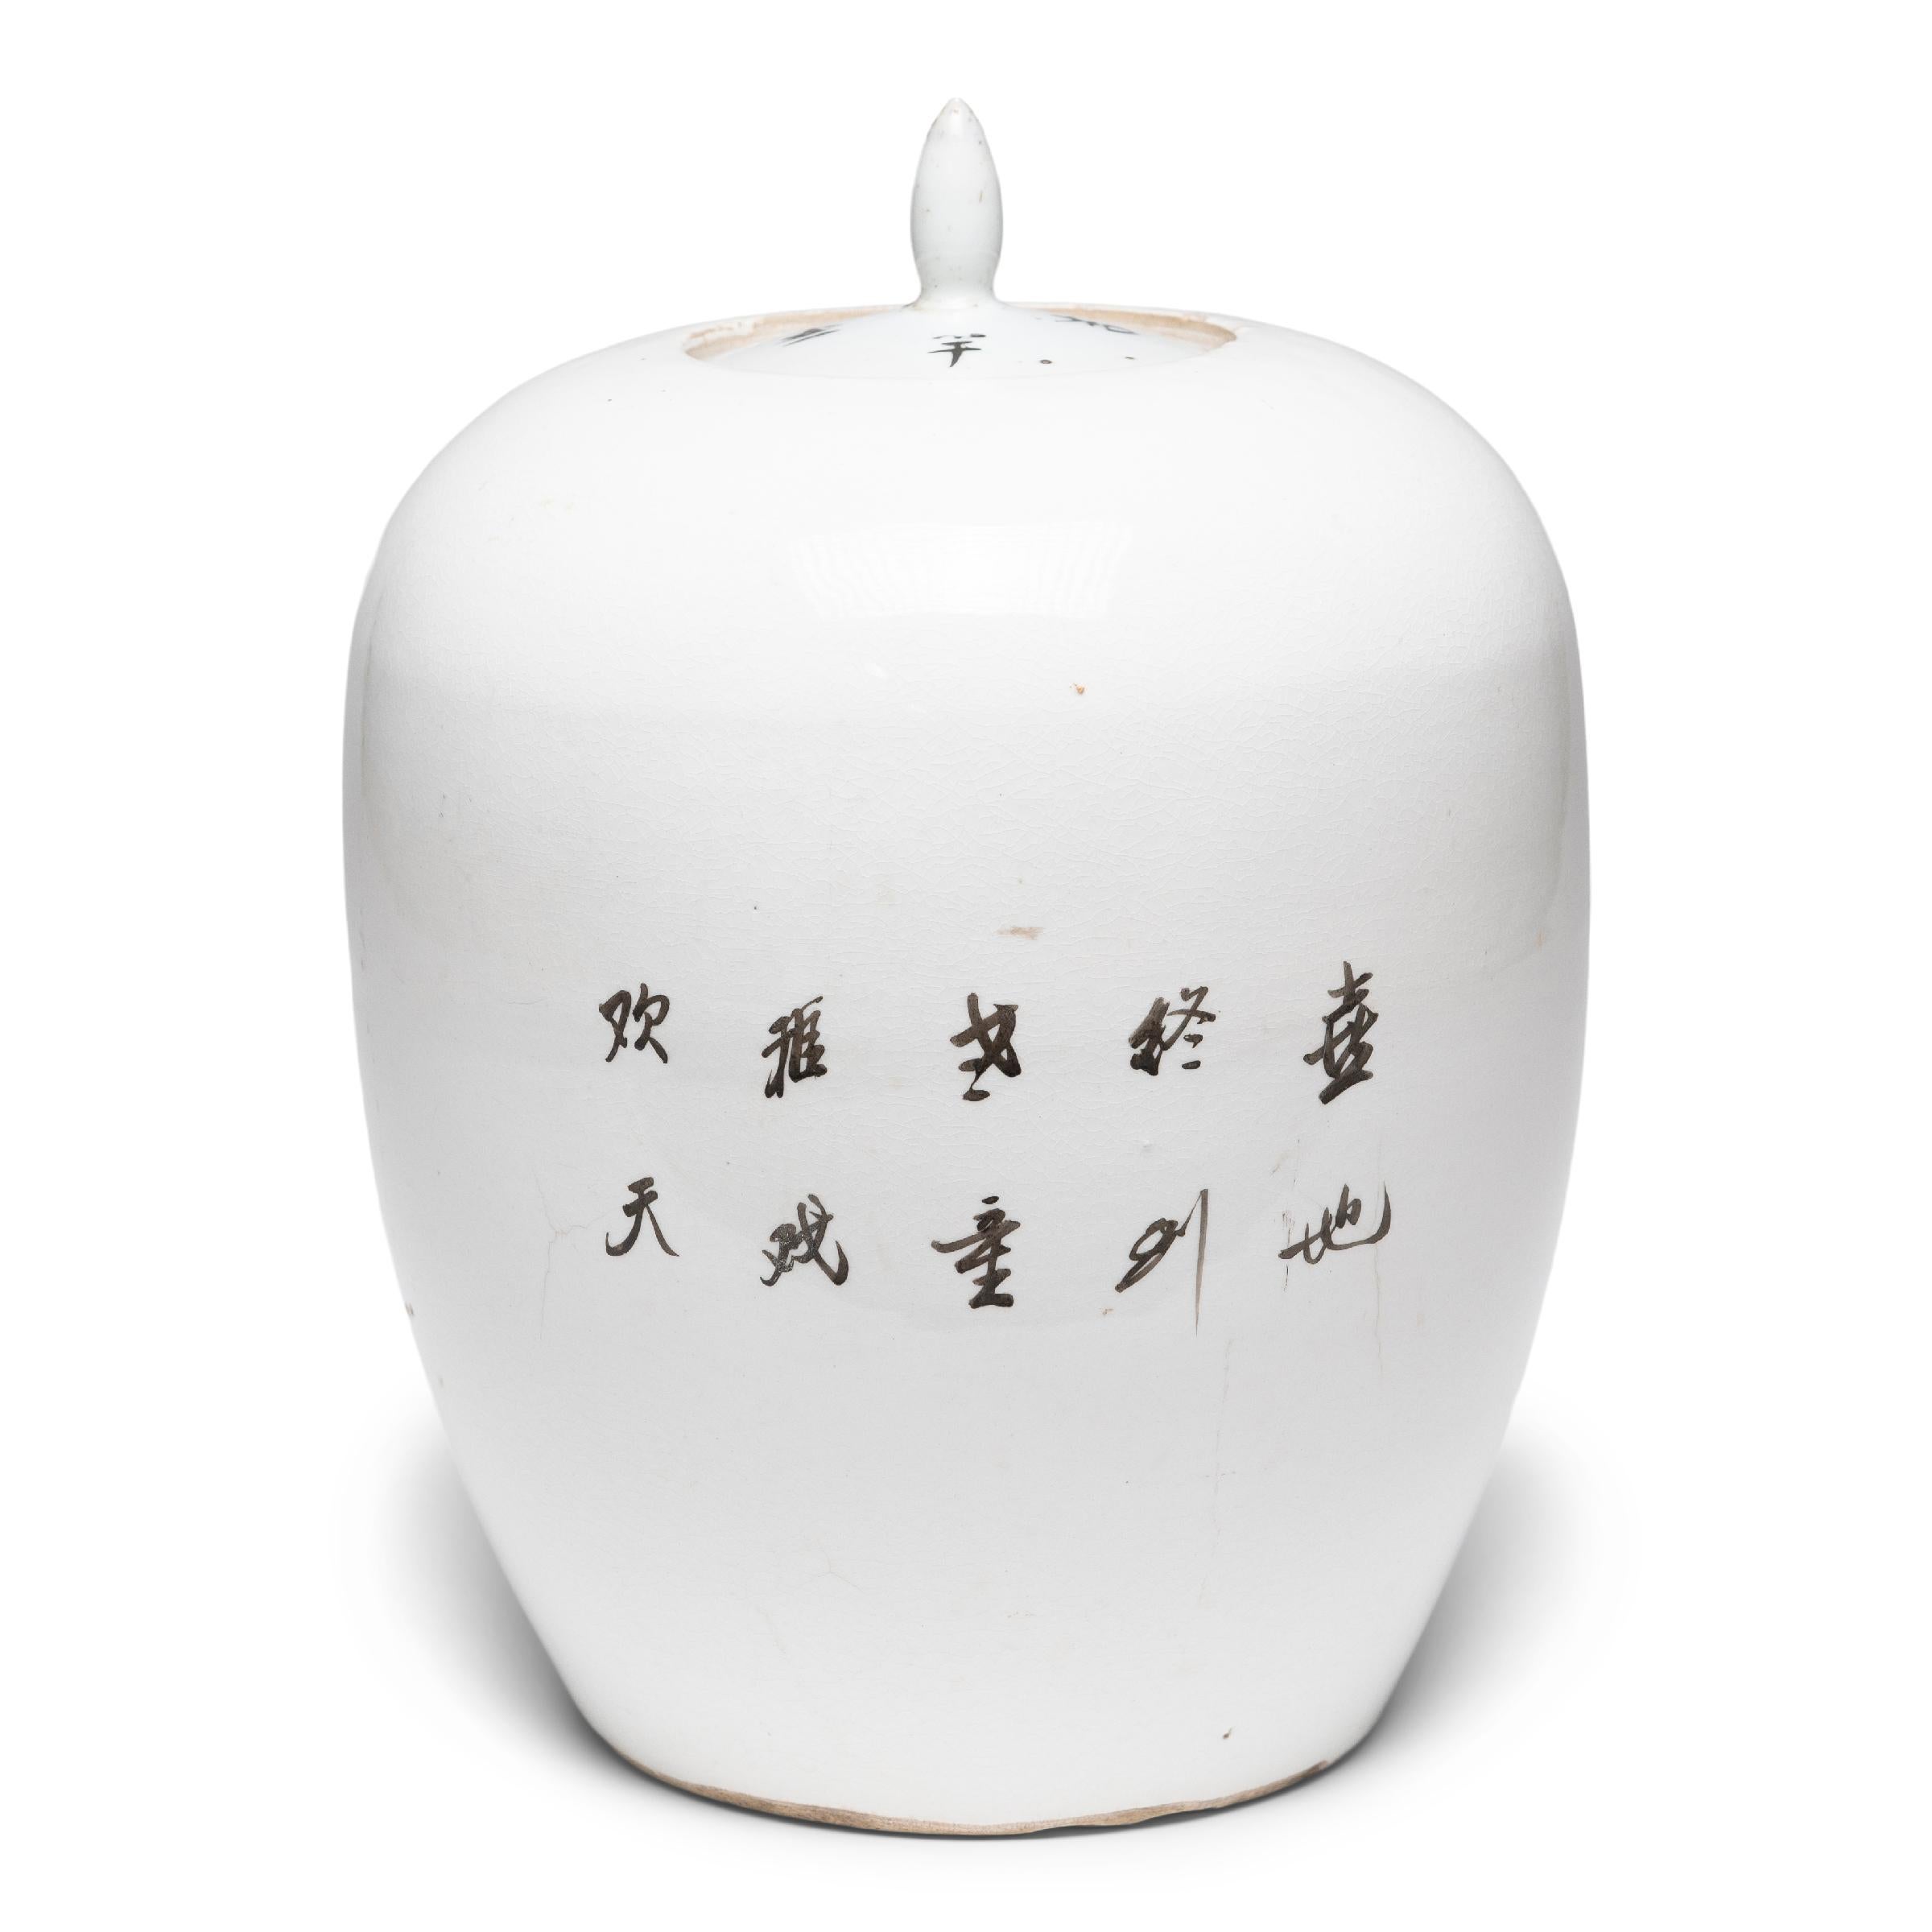 Contrasted by a crisp white field, this oval jar is decorated in the famille rose style with a lively scene of young children playing in a courtyard garden. Under an overarching bamboo tree and flowering branch, a young girl is perched atop a stone